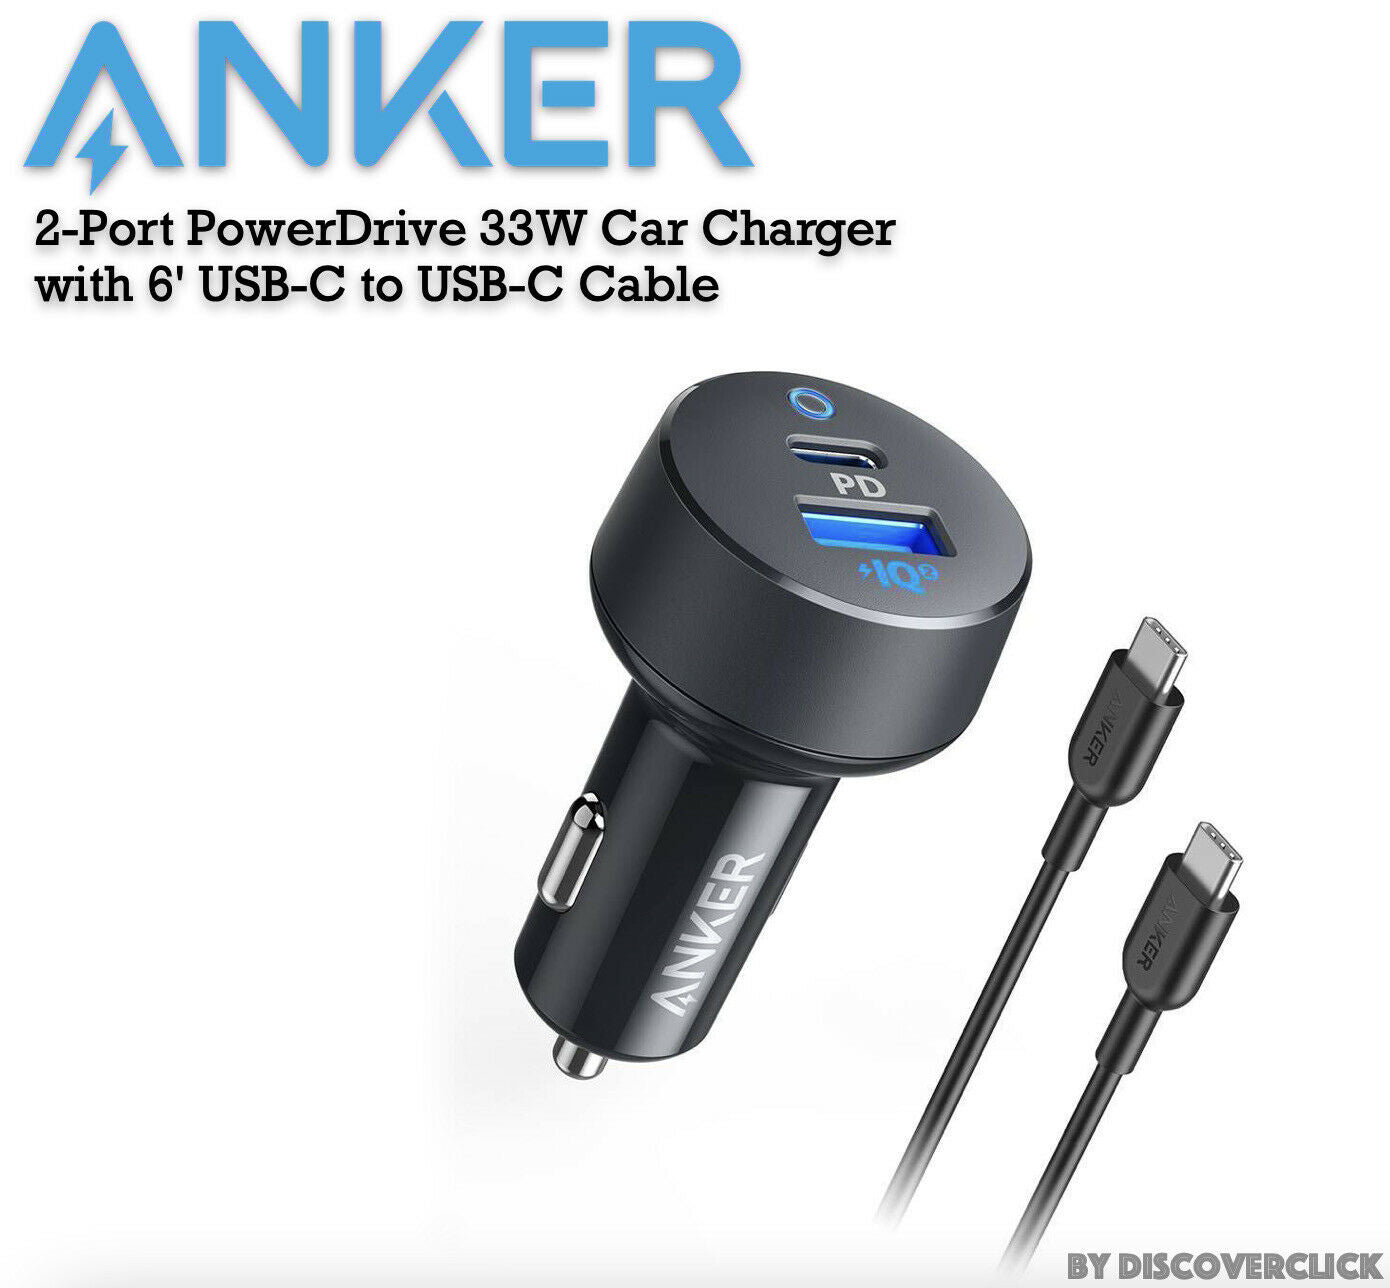 Anker Classic 2-Port PD 33W Car Charger with a Power Delivery 6' USB C to USB C Cable